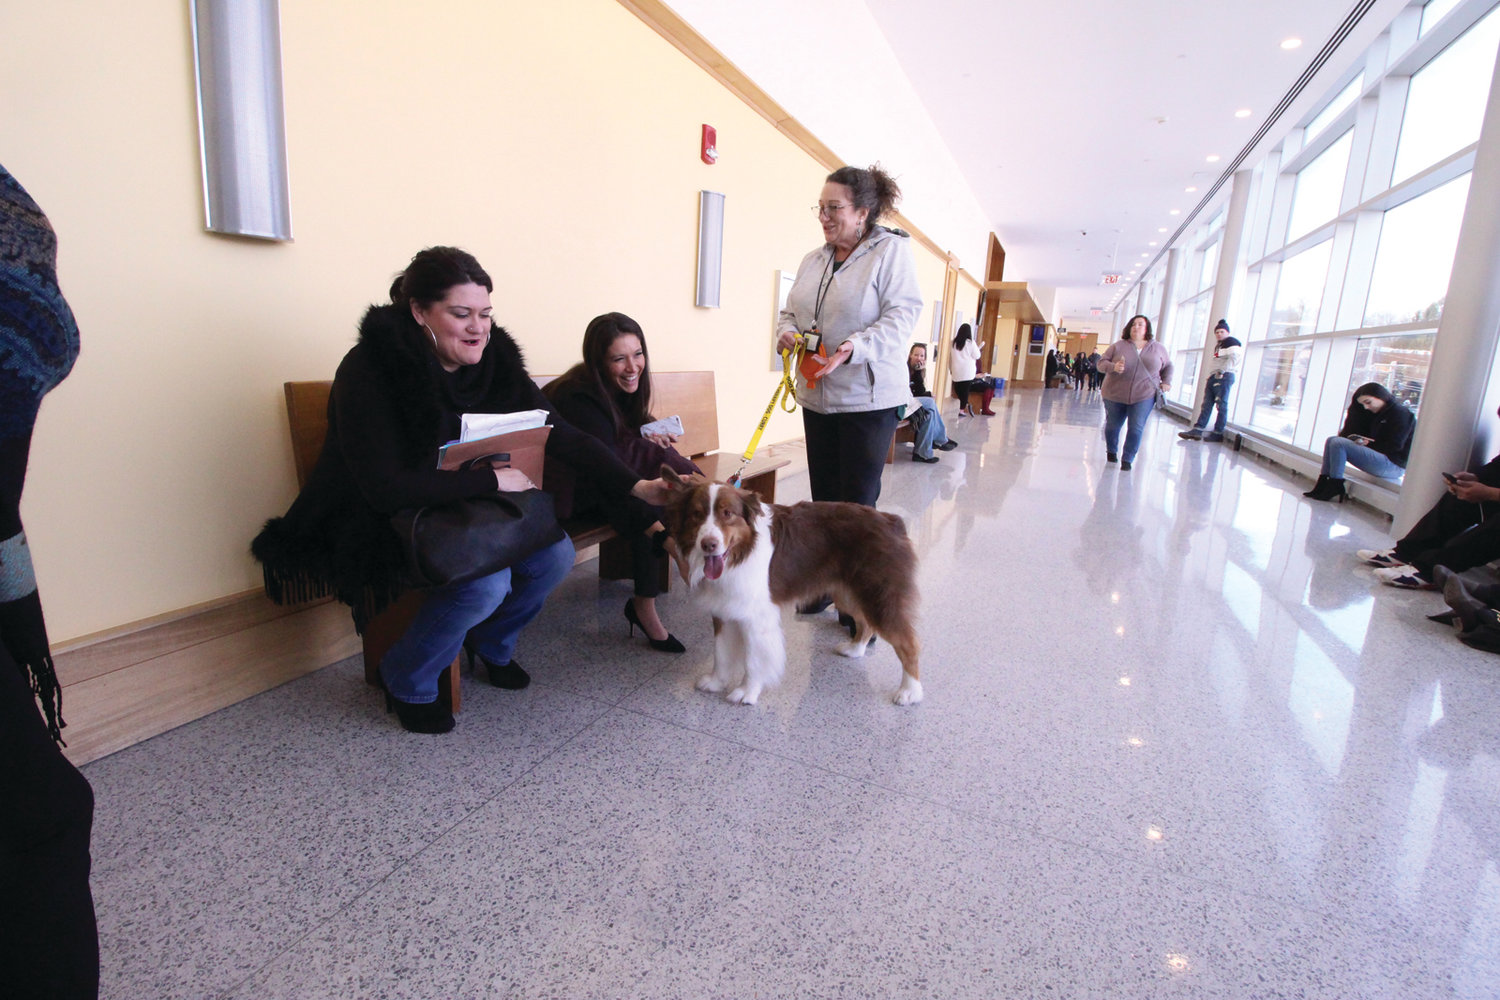 MAKING FRIENDS: Curry makes friends with one of the many people waiting in the corridor to Family Court as Judy Van-Wyk looks on.